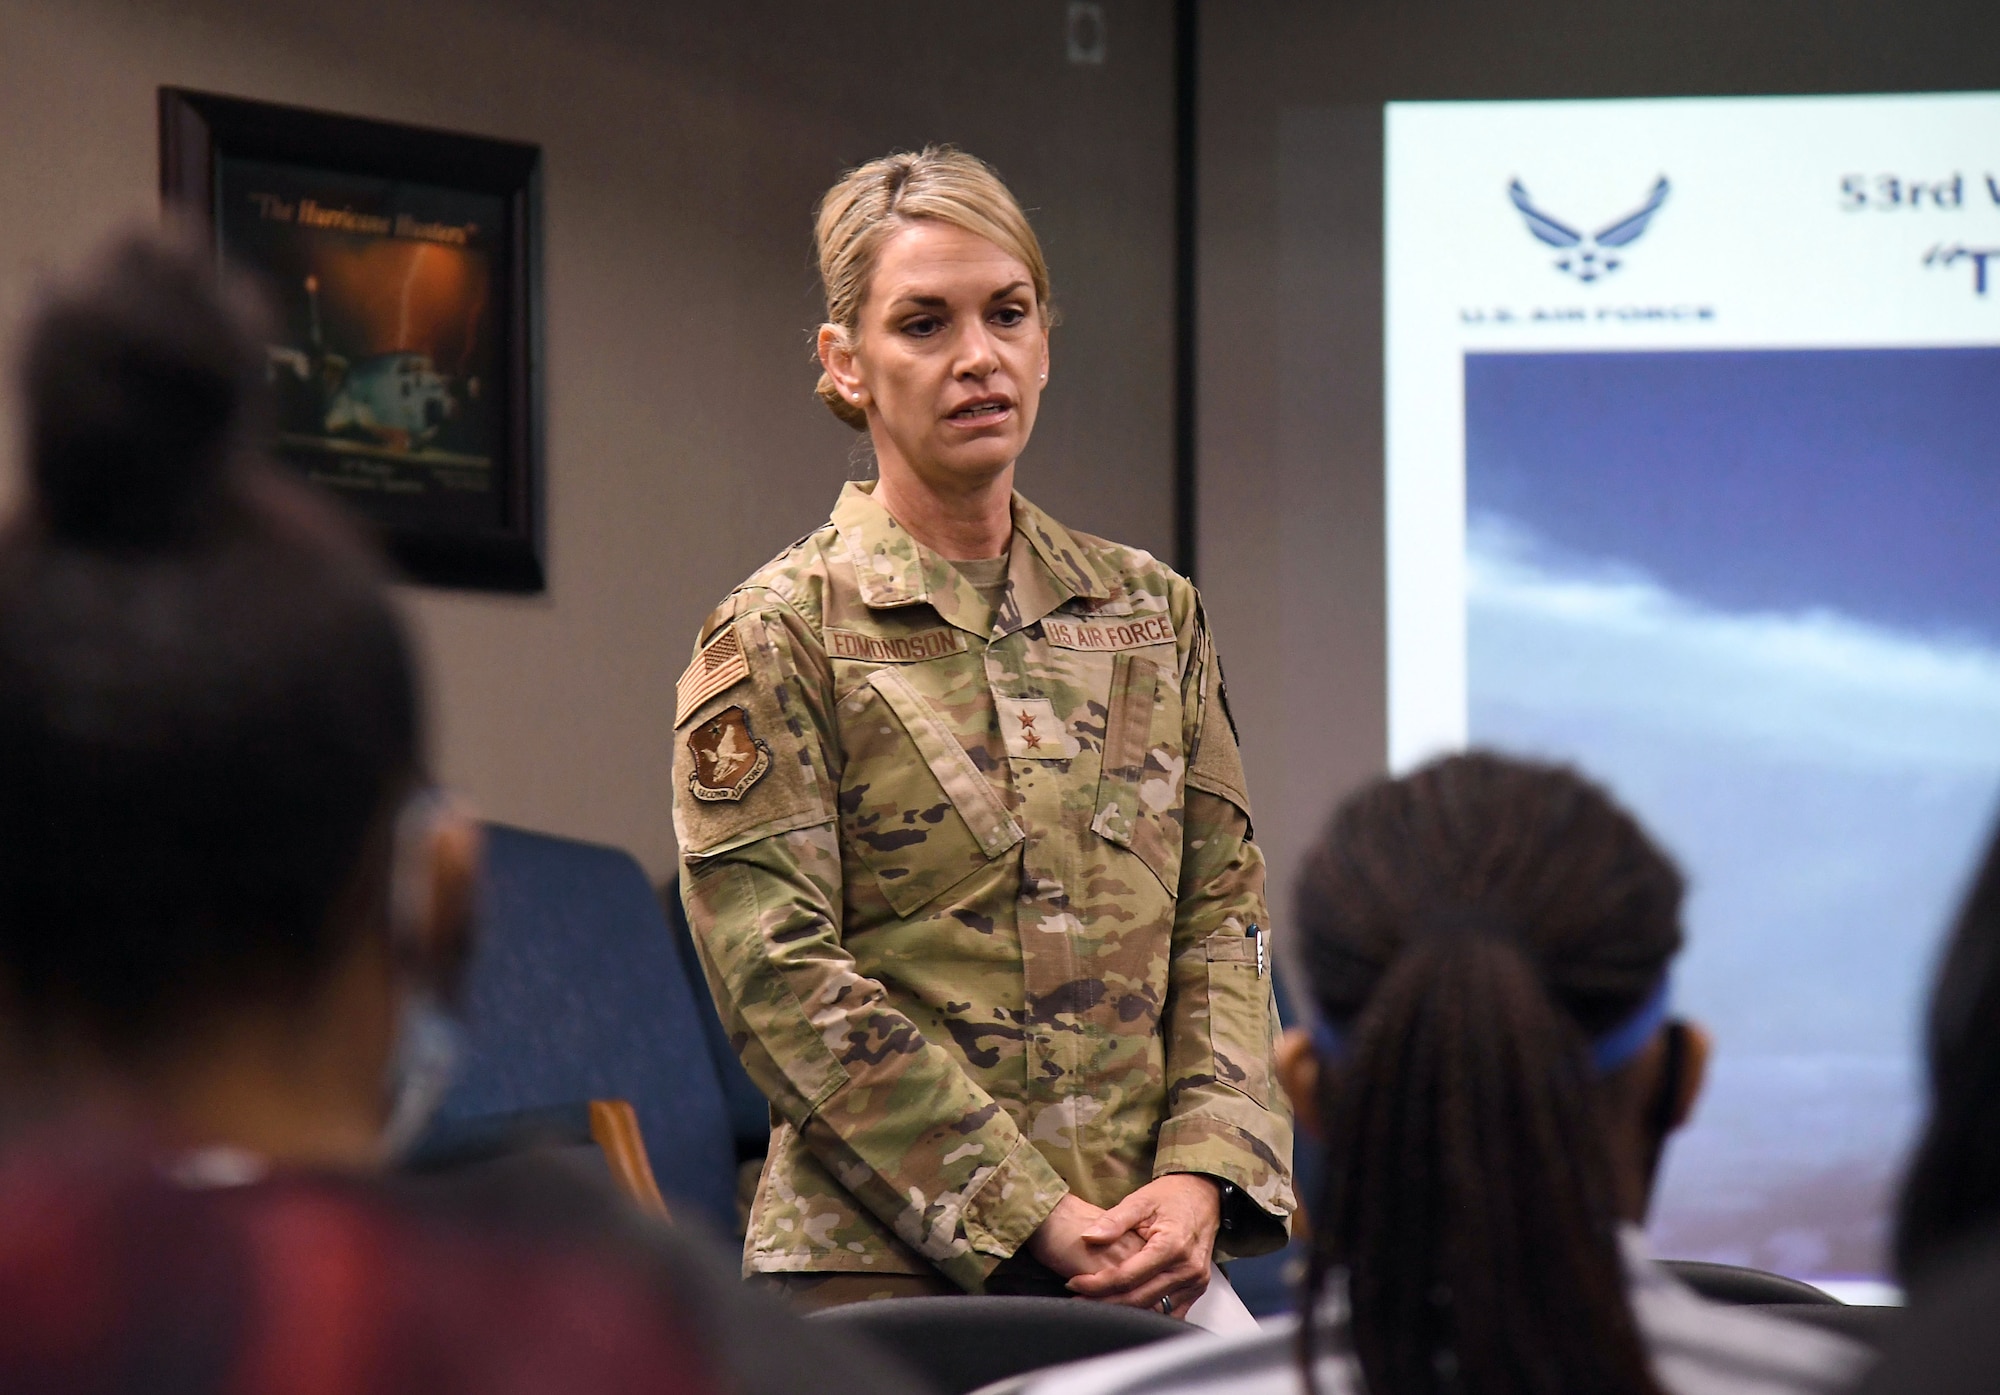 U.S. Air Force Maj. Gen. Michele Edmondson, Second Air Force commander, delivers remarks to Jefferson Davis County High School Junior ROTC cadets inside the 53rd Weather Reconnaissance Squadron building at Keesler Air Force Base, Mississippi, April 12, 2022. Throughout their visit to Keesler, more than 30 cadets toured a WC-130J aircraft, visited air traffic control training courses and received a military working dog demonstration. (U.S. Air Force photo by Kemberly Groue)